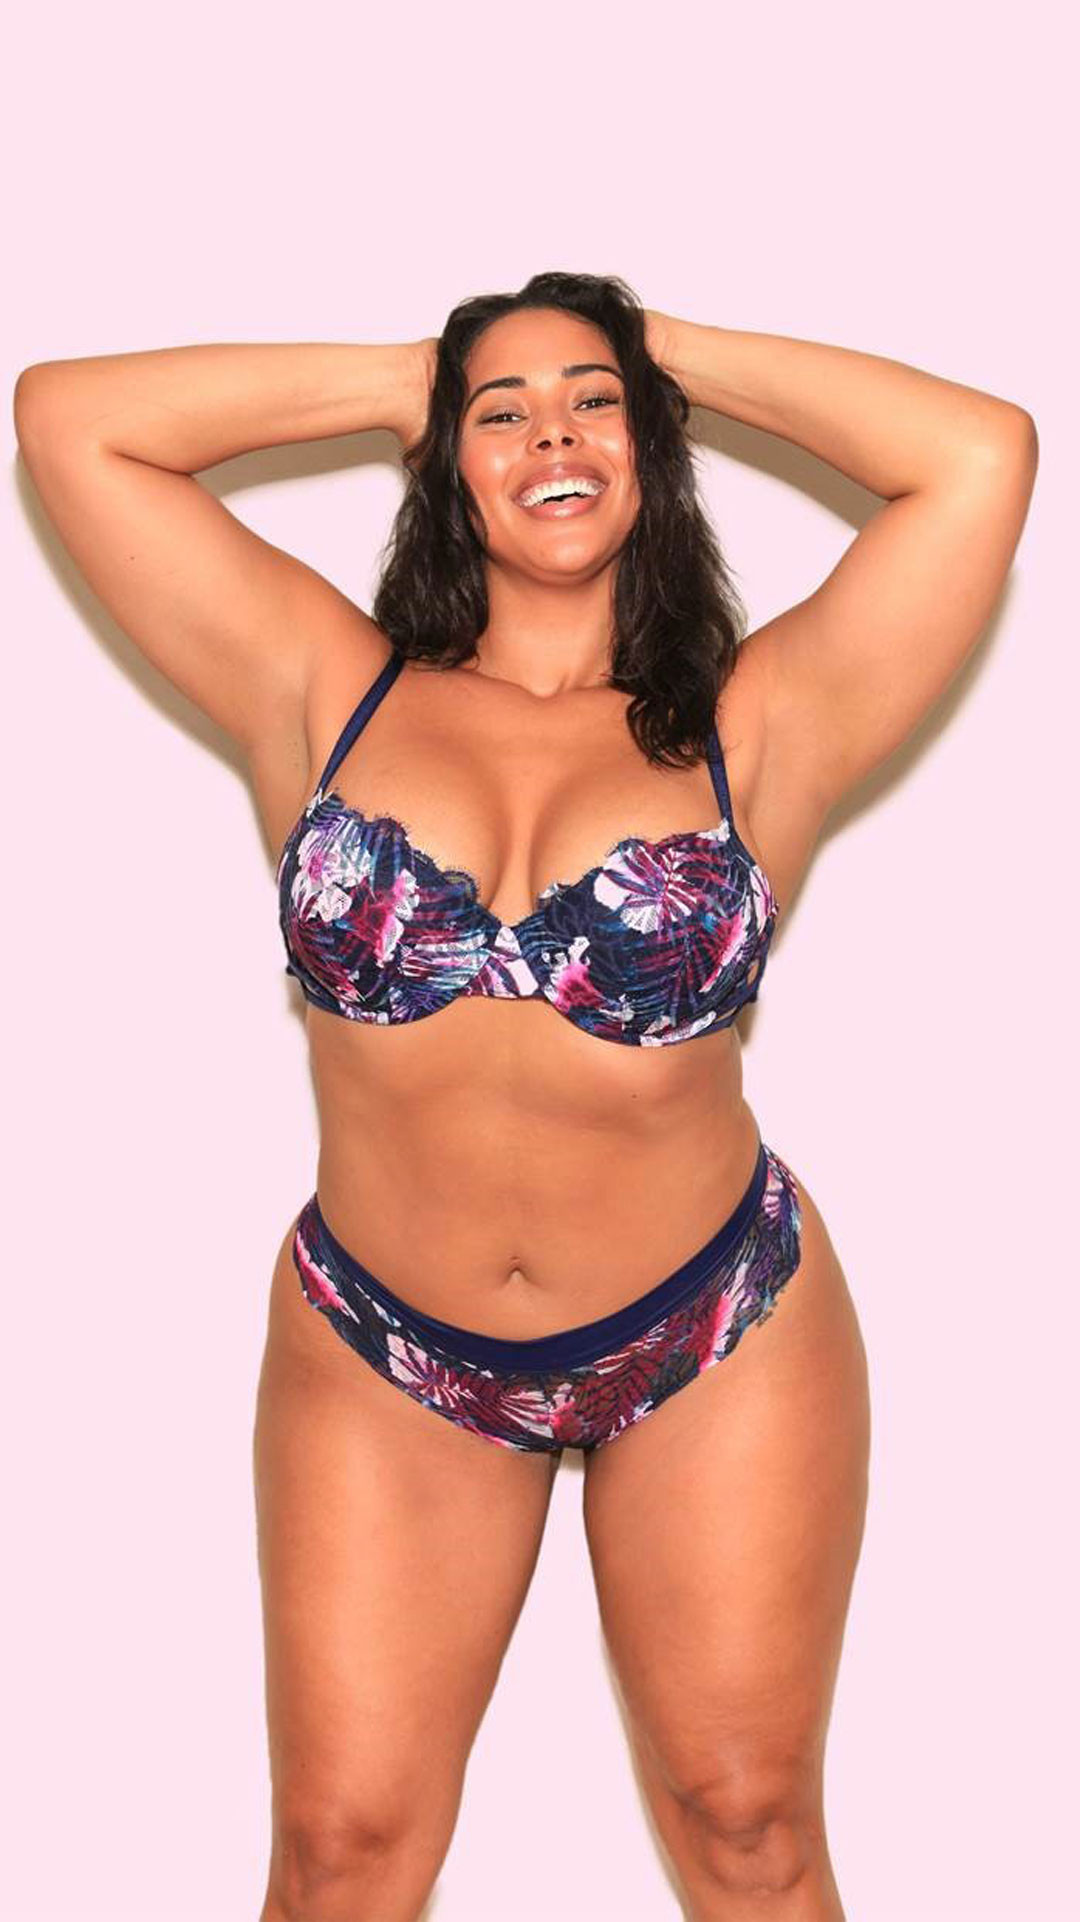 Plus-Size' Model Posts Side-by-Side Pics With Victoria's Secret Ads